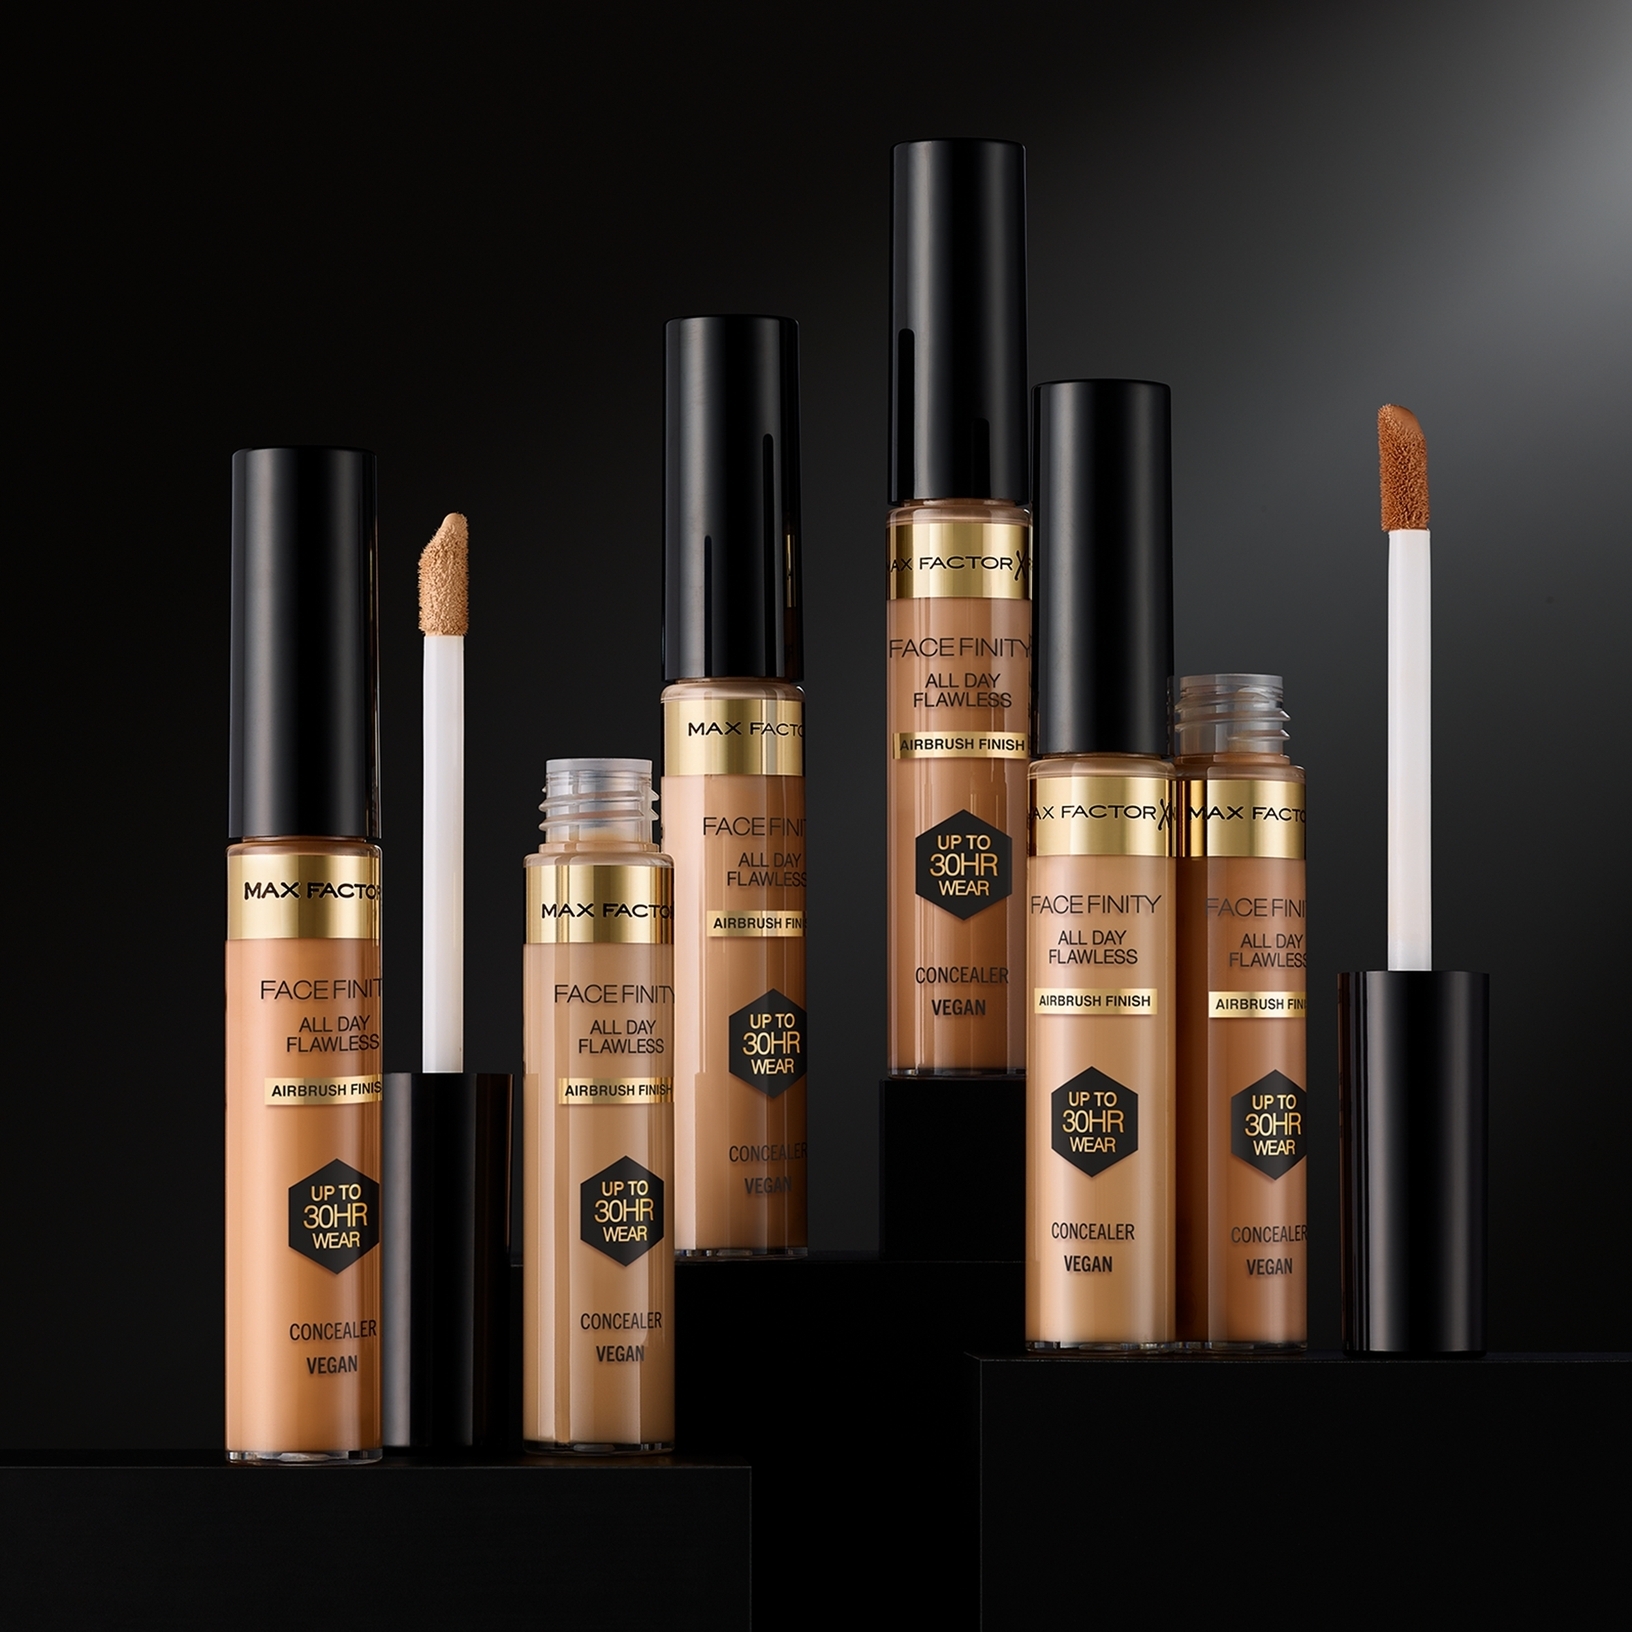 Facefinity All Day Flawless Max | Factor Concealer